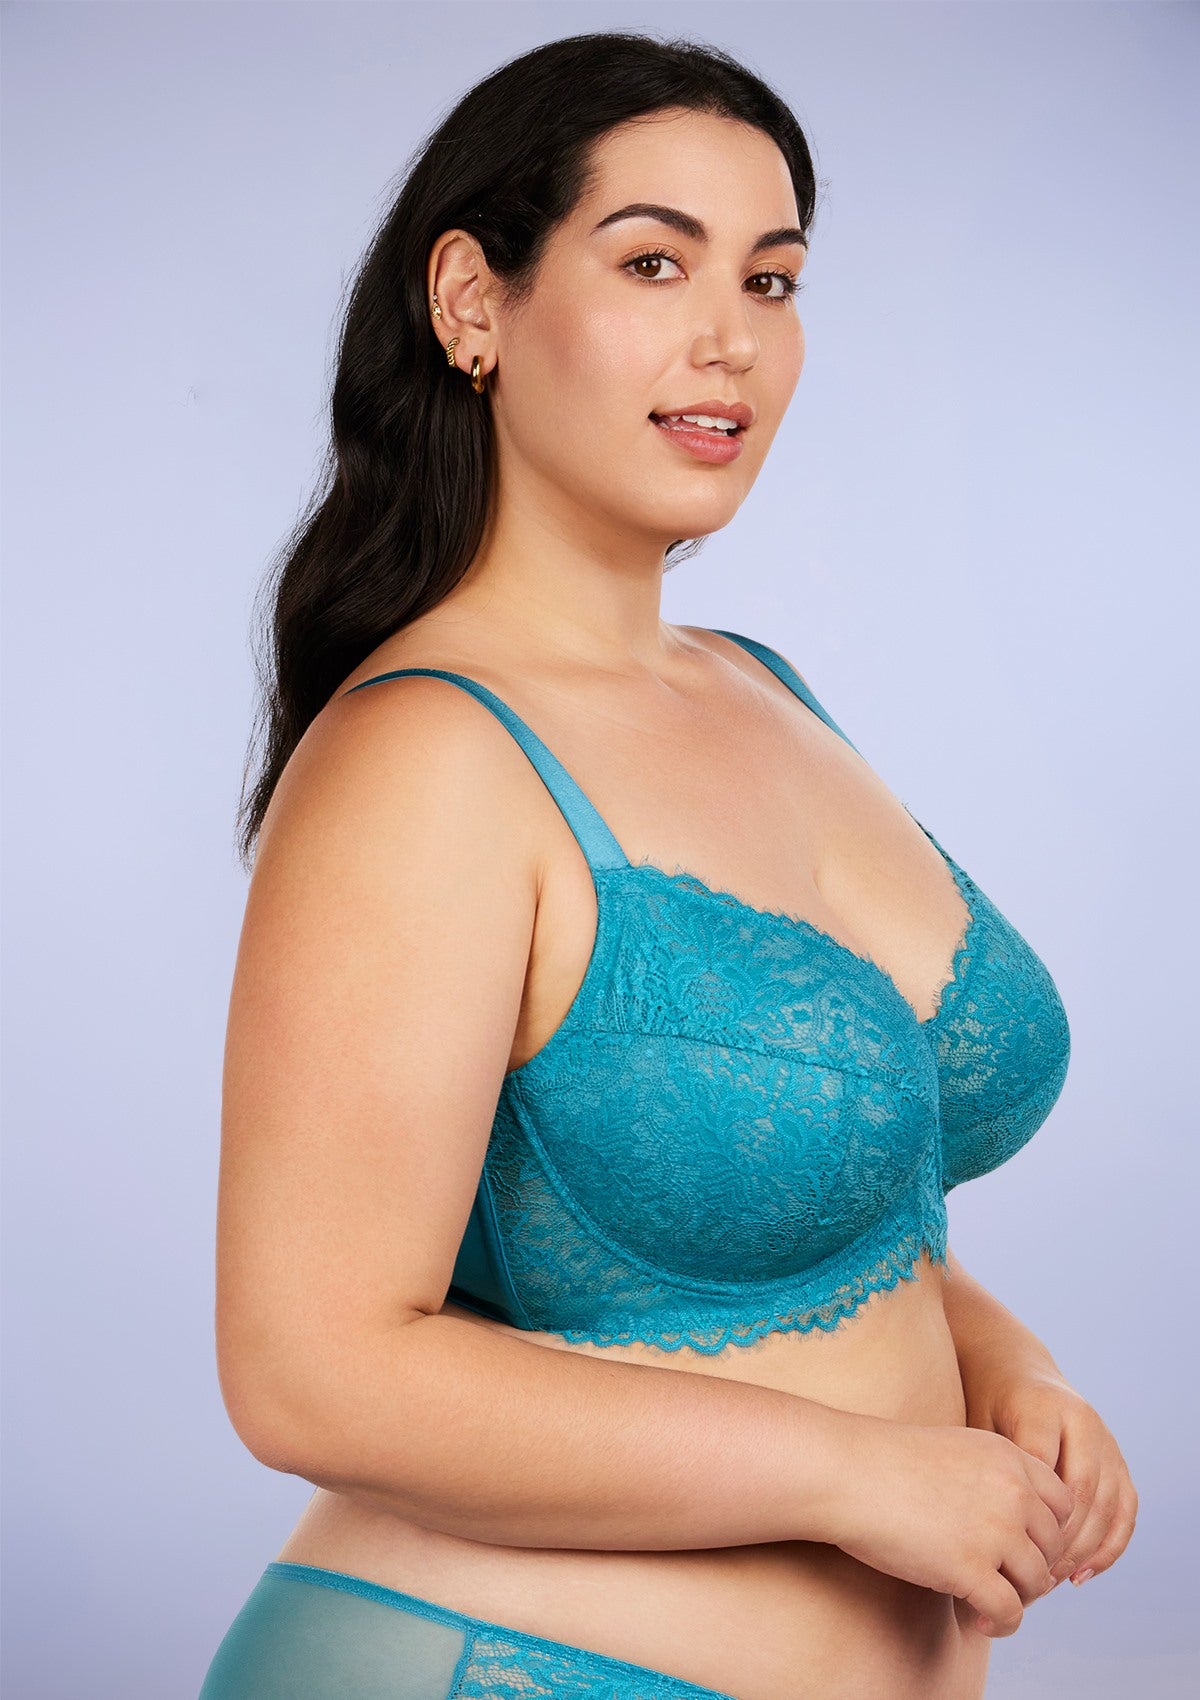 HSIA Sunflower Unlined Lace Bra: Best Bra For Wide Set Breasts - Horizon Blue / 44 / G